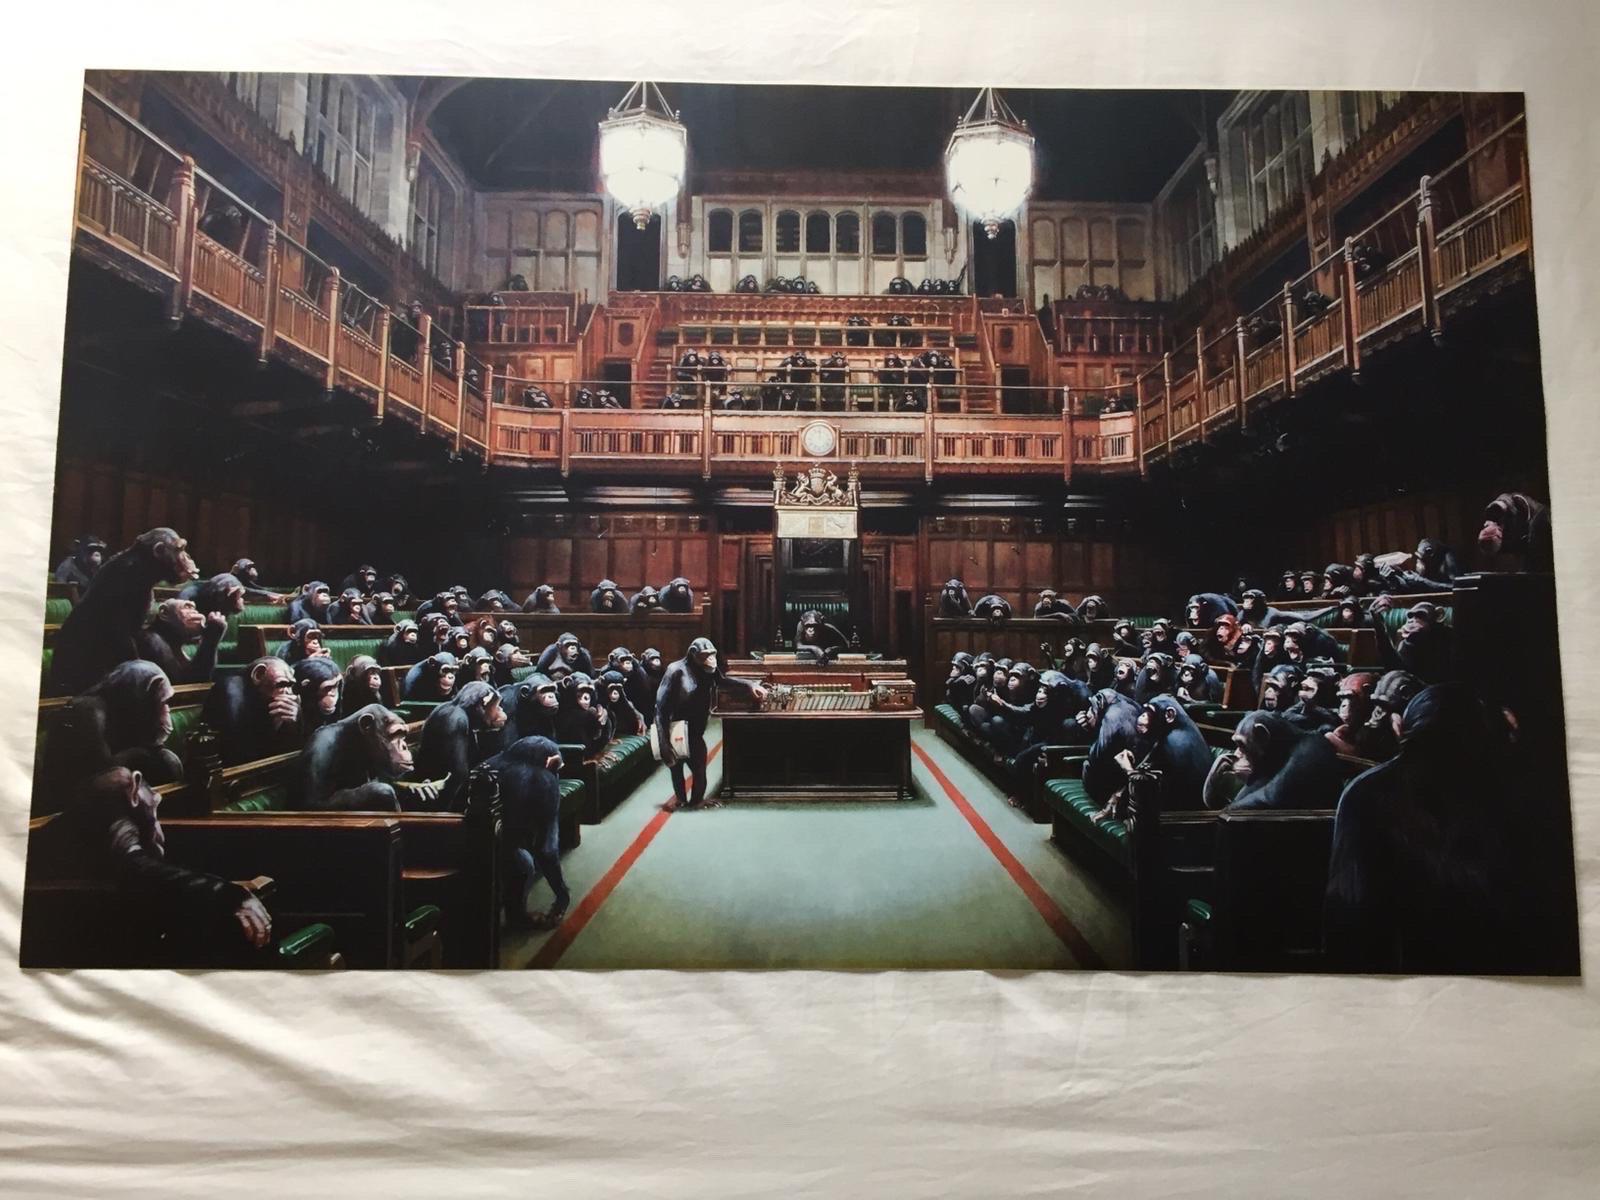 Banksy, Monkey Parliament’ 2009

Offset Lithograph

Size: 84 x 53 cm (33.1 x 20.8 in)

Edition: limited, exact quantity unknown

Description: Official Banksy lithograph produced for the Bristol Museum exhibition.

Condition: Has minor scratches from